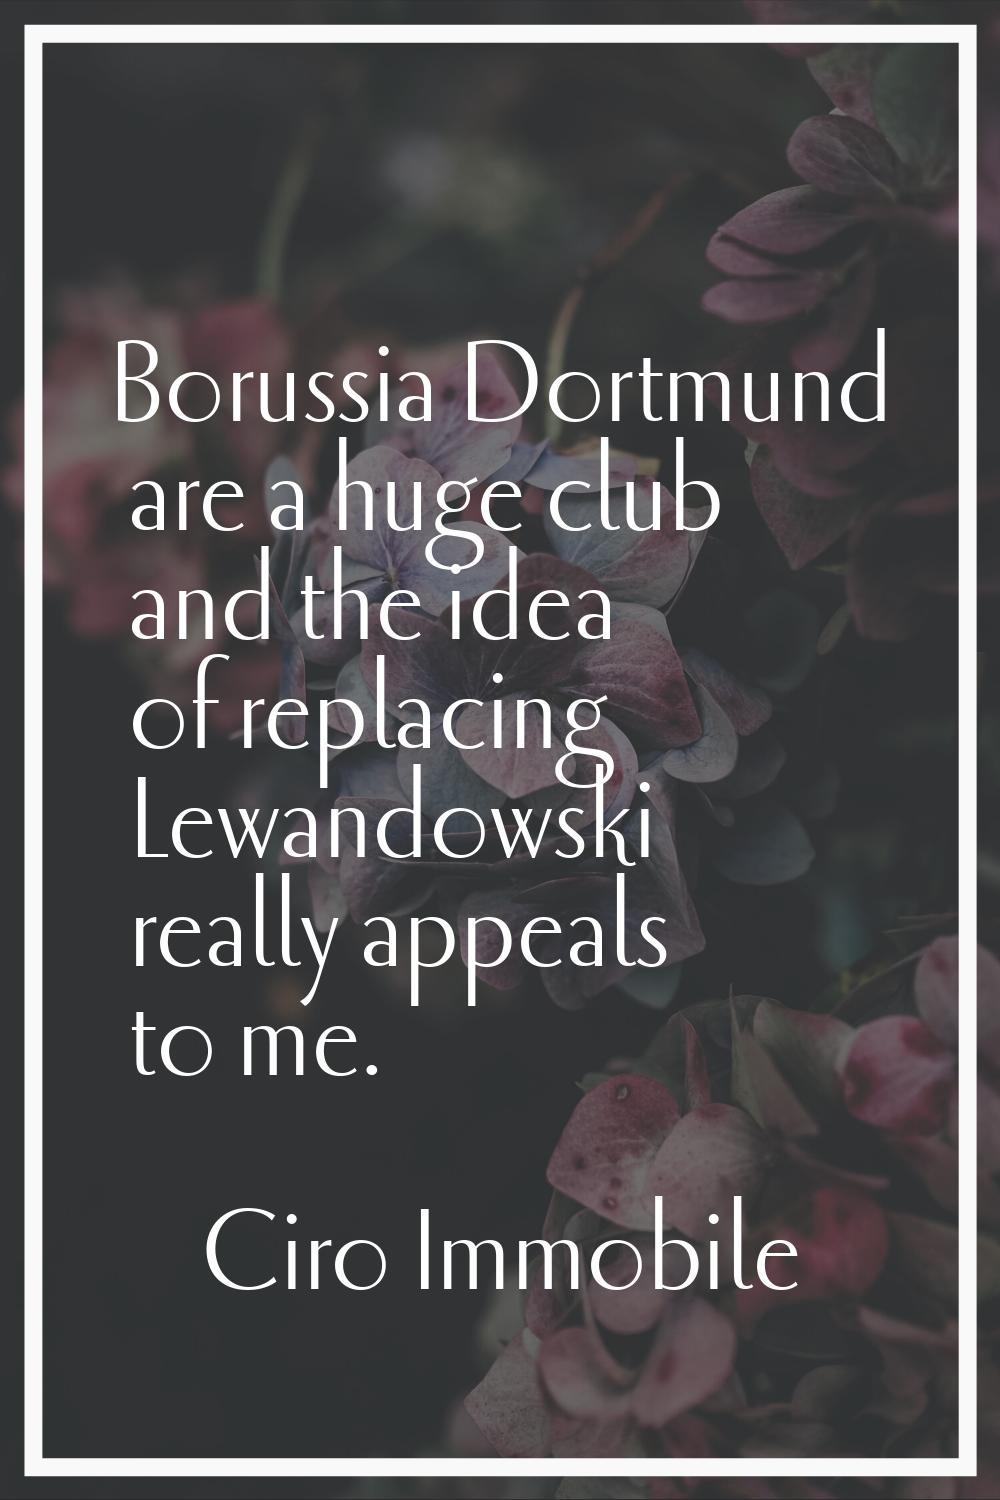 Borussia Dortmund are a huge club and the idea of replacing Lewandowski really appeals to me.